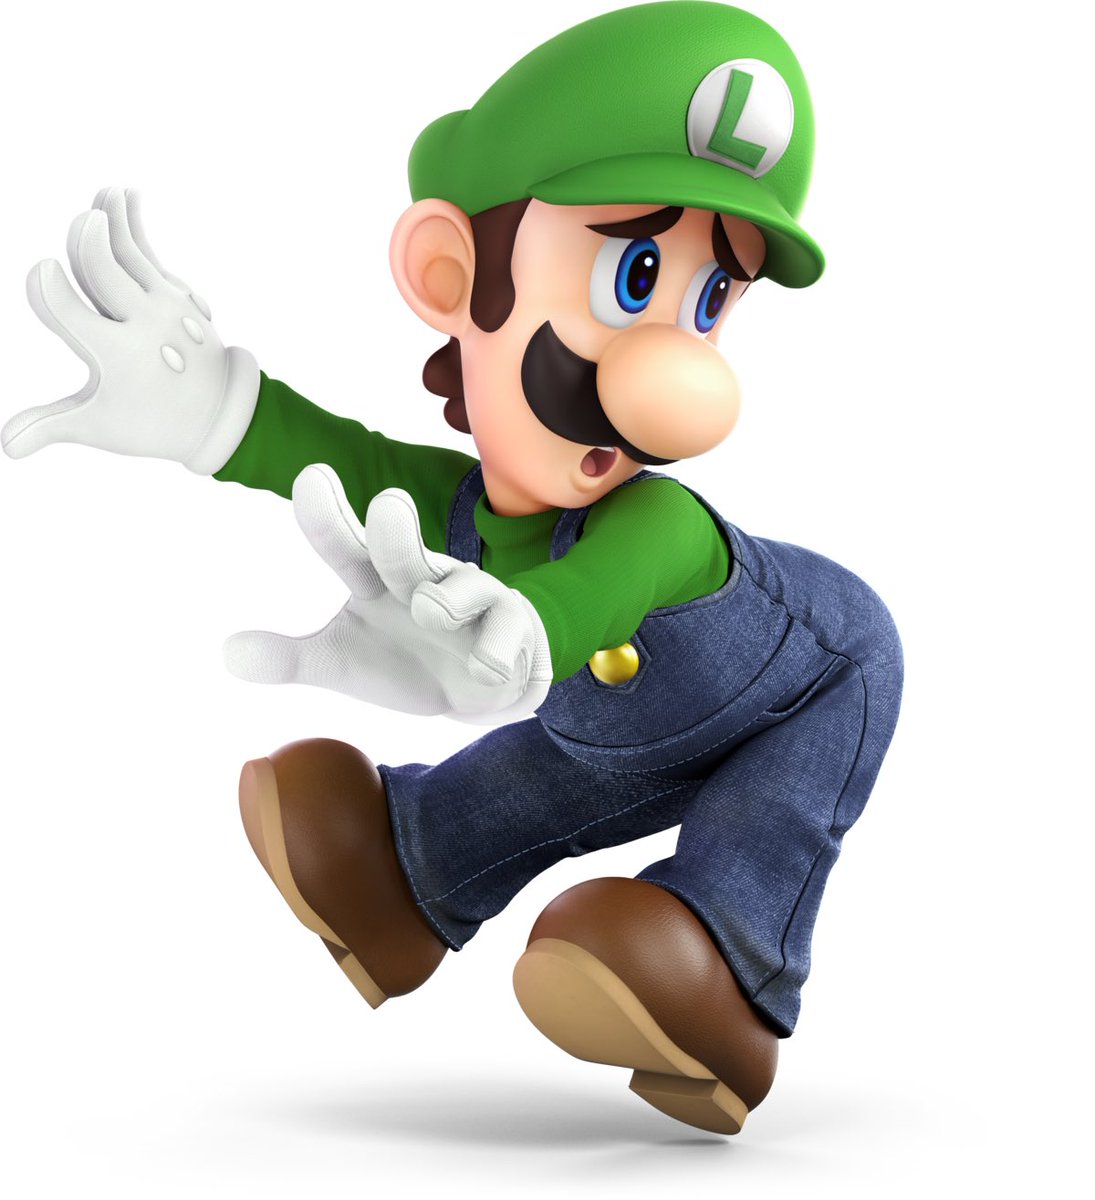 Luigi Mains: Luigi mains just love Luigi. Super Luigi U and Luigi’s Mansion are in their top 10 games of all time. They’ll clean your car. Nurse you back to health. And save you from Zombies because thats just how cool they are.